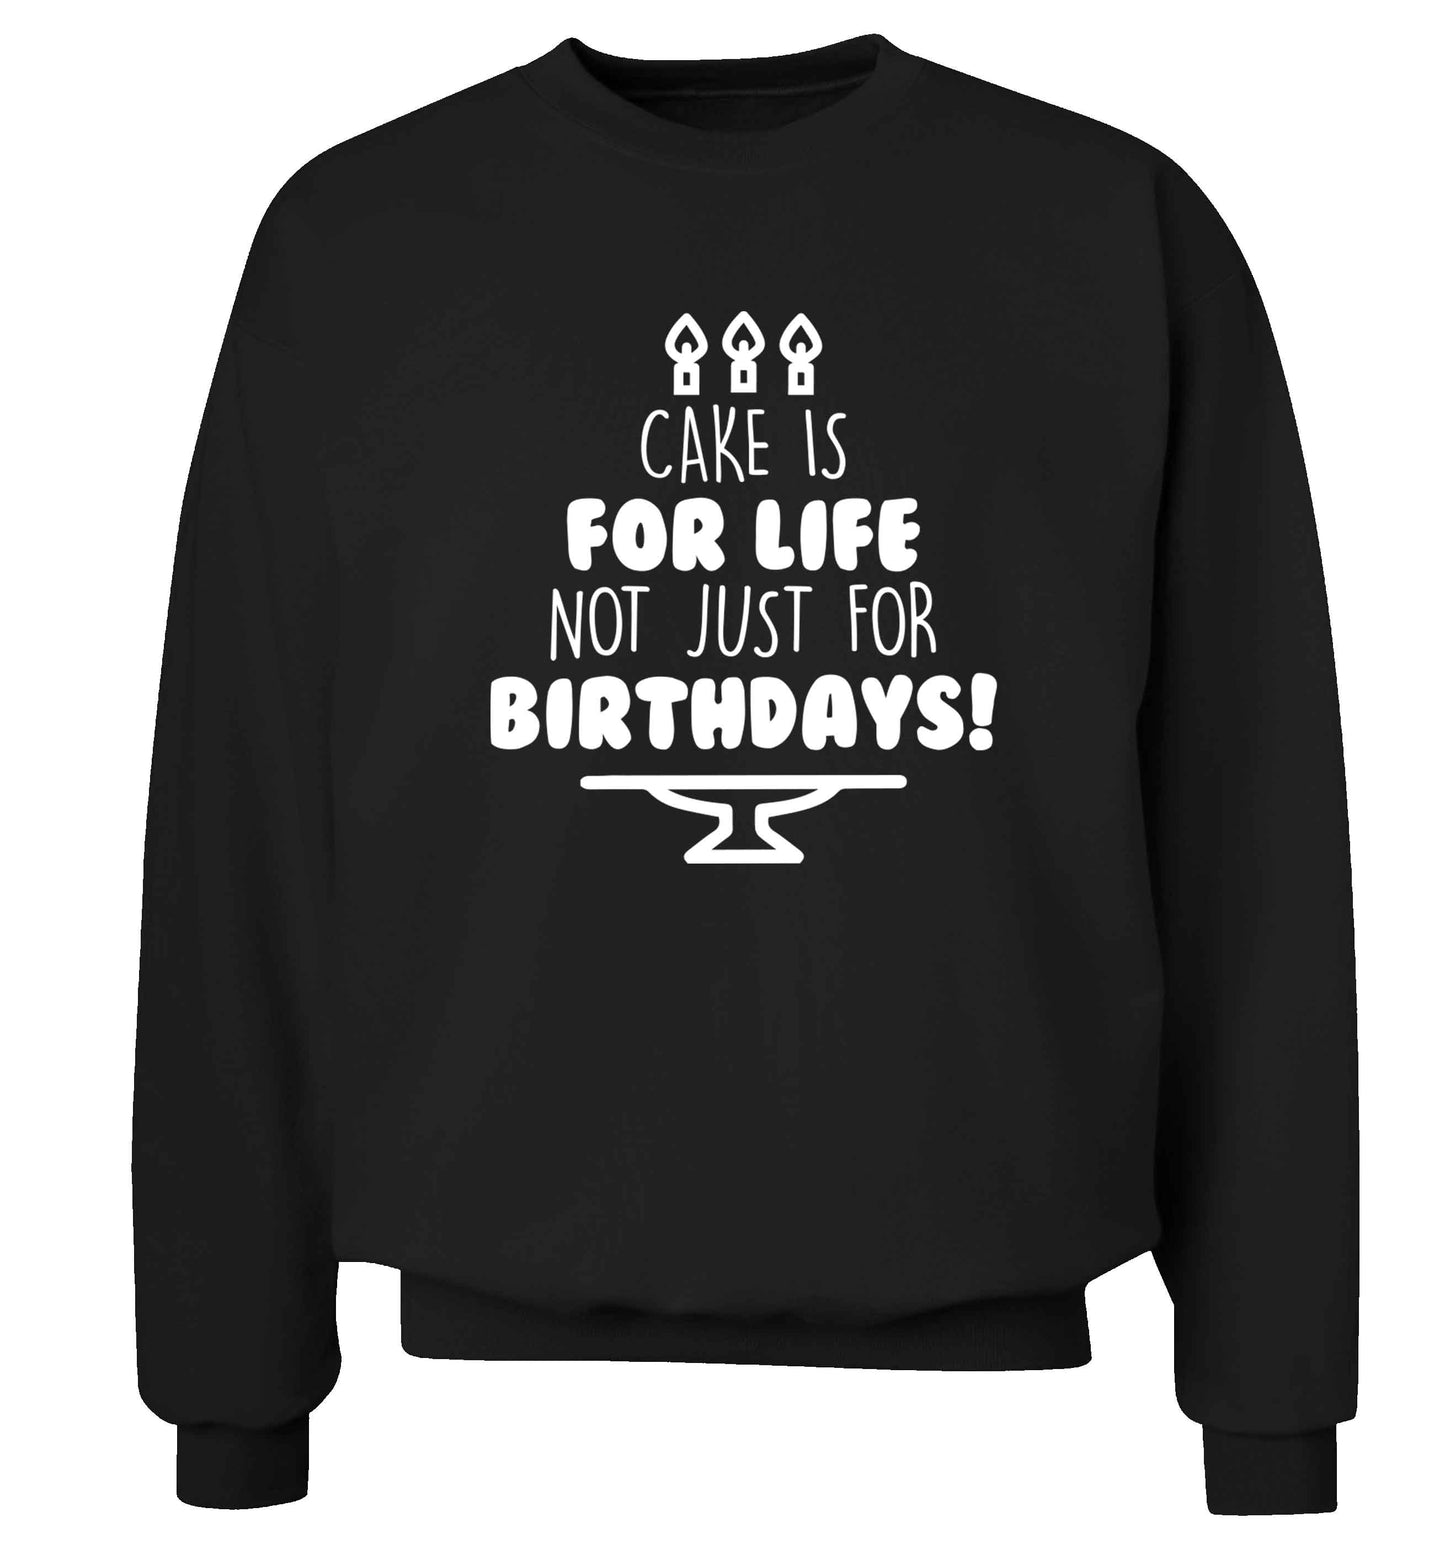 Cake is for life not just for birthdays Adult's unisex black Sweater 2XL